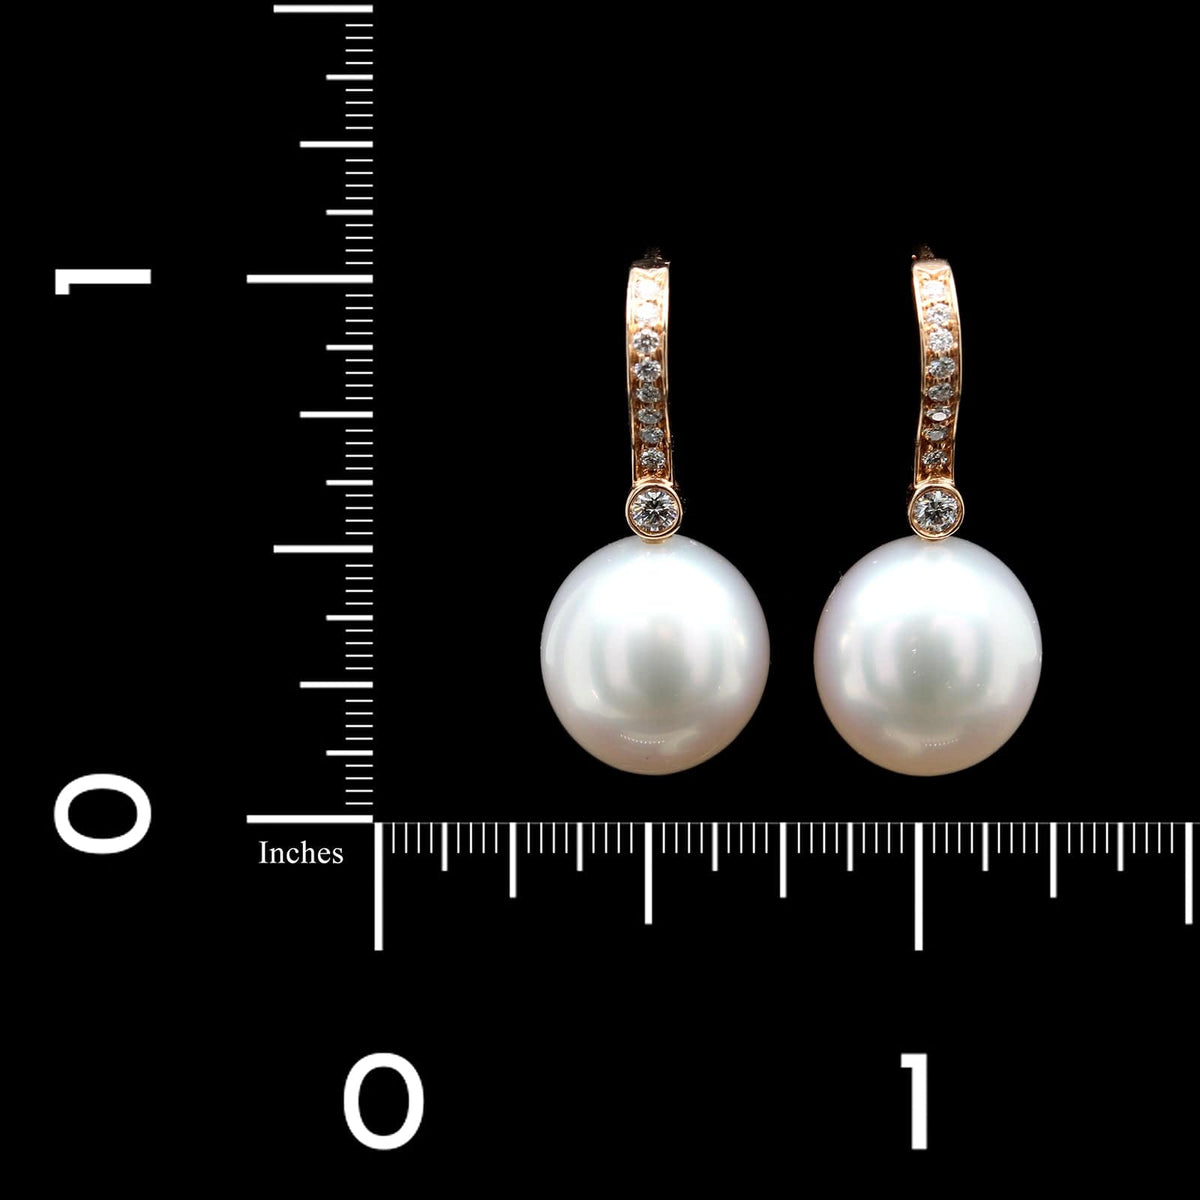 Tiffany & Co. 18K Rose Gold Estate South Sea Cultured Pearl and Diamond Earrings